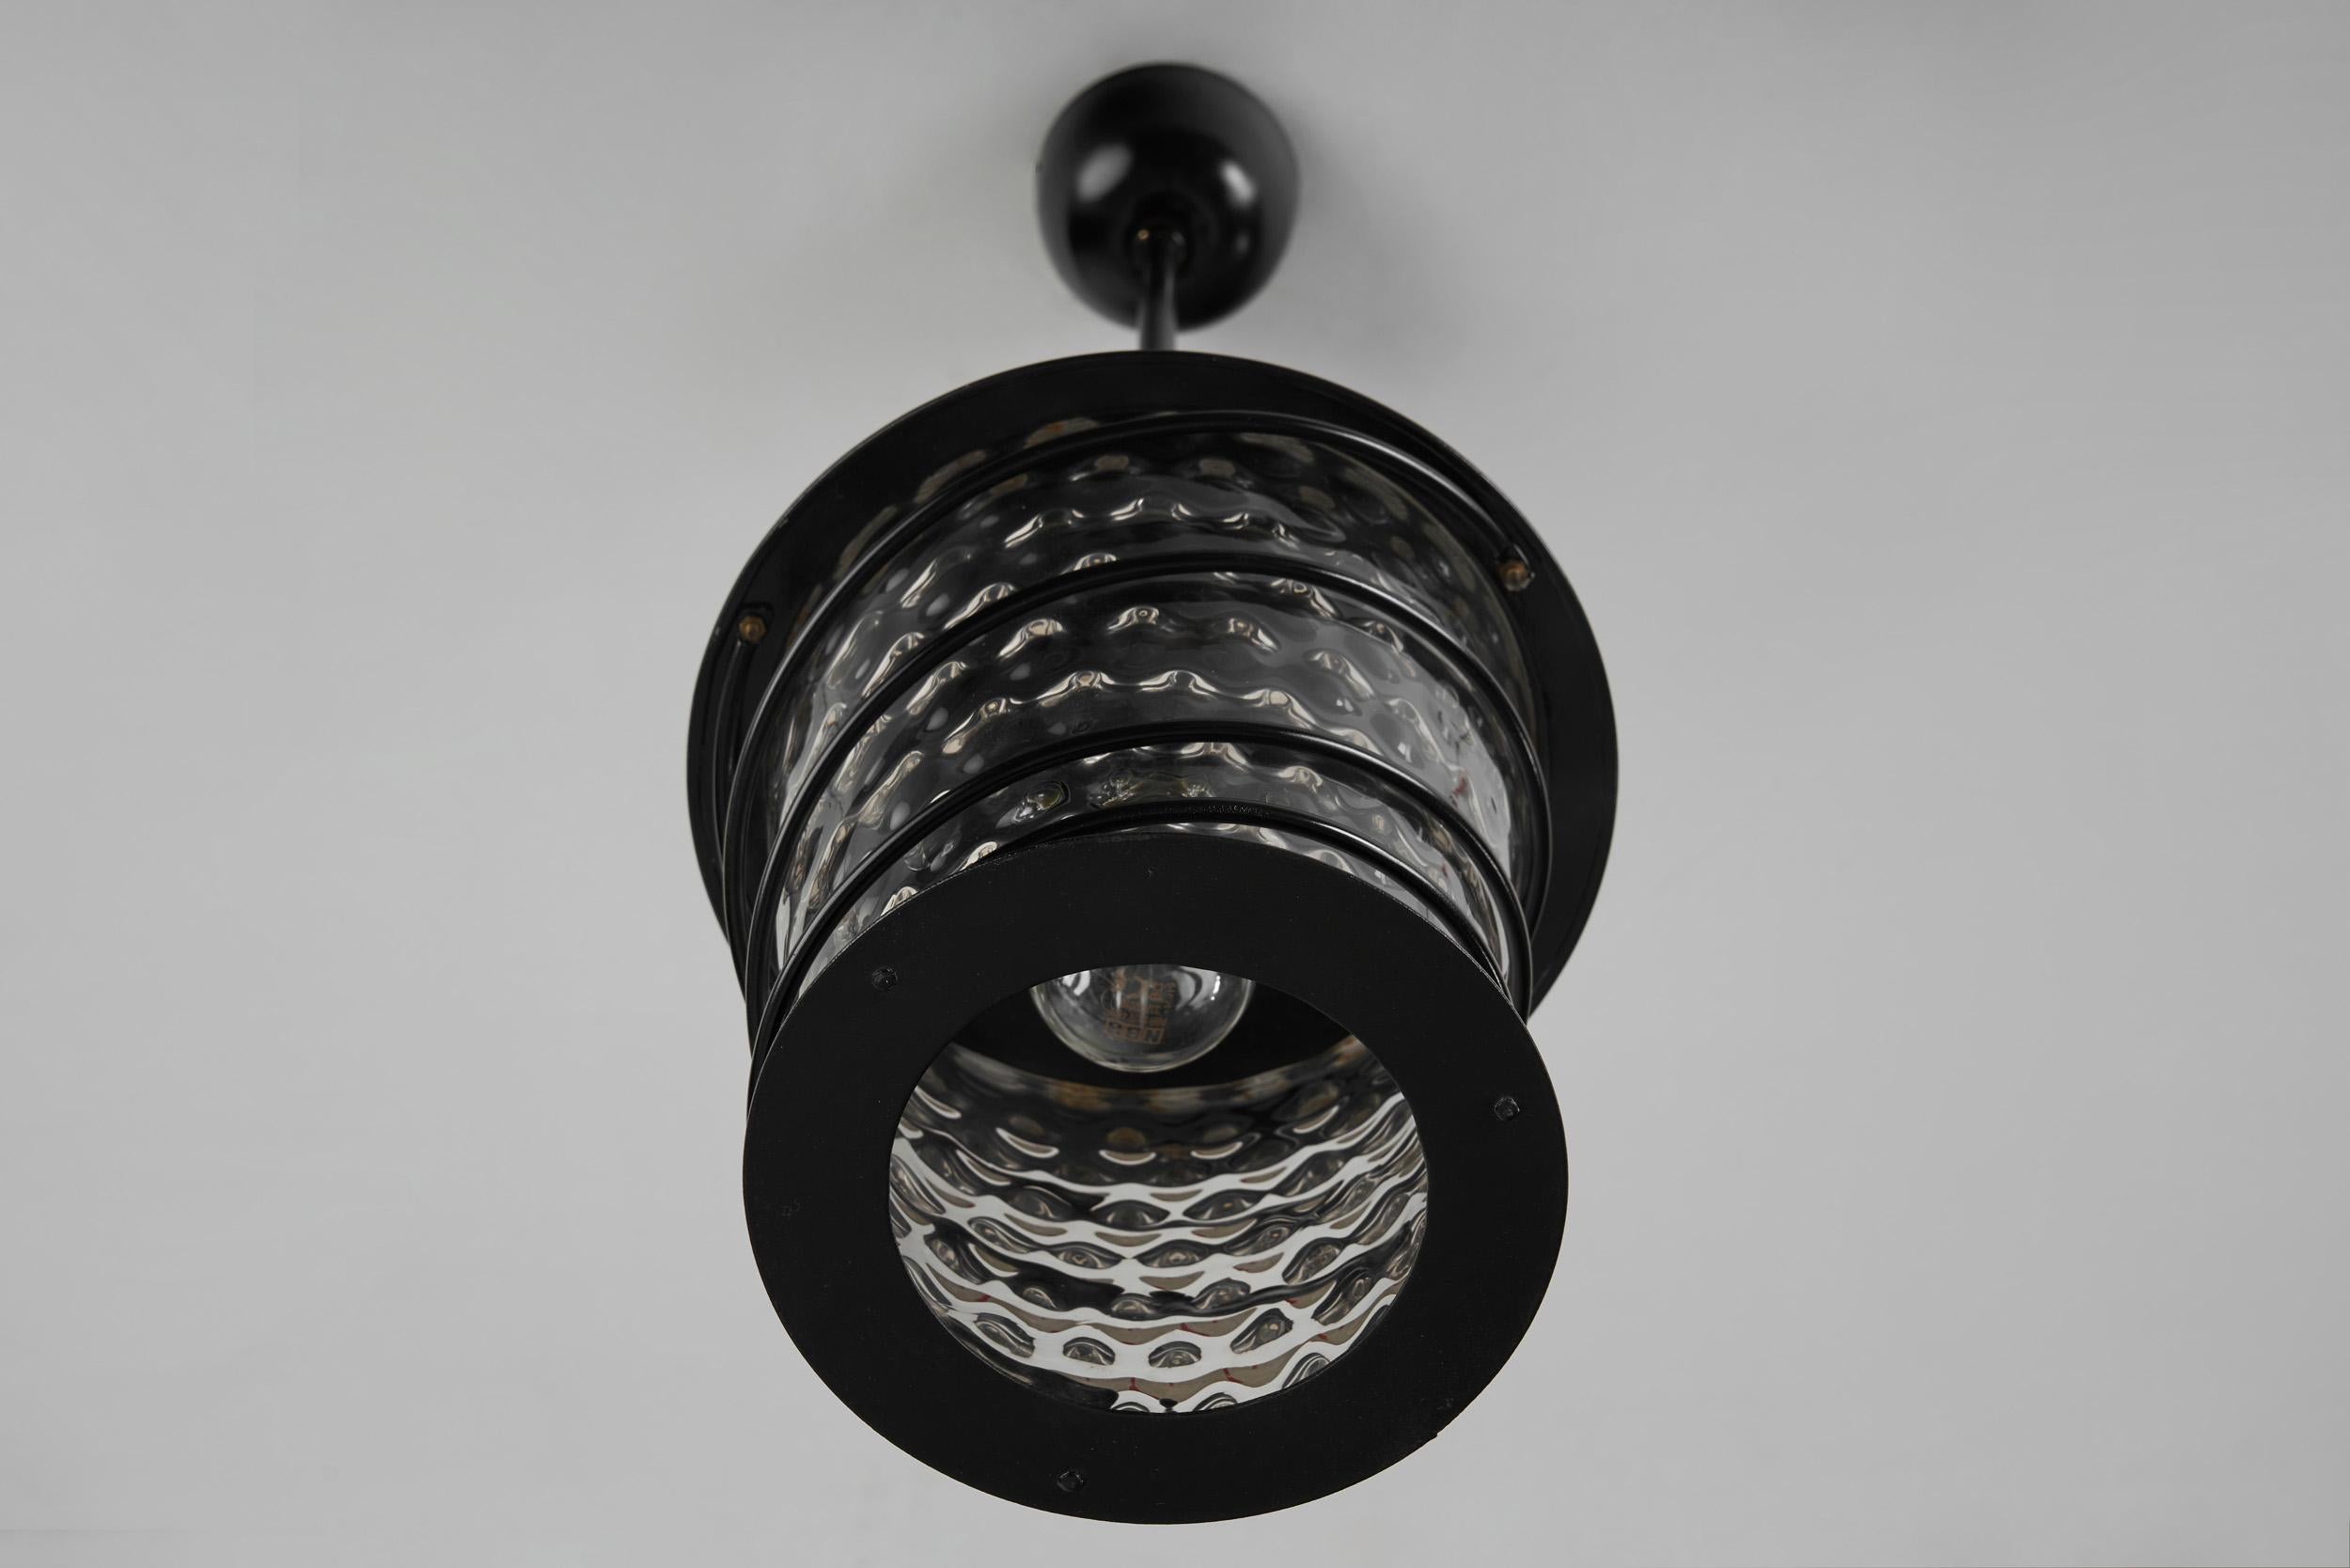 Scandinavian Tin and Glass Accent Ceiling Lamp, Scandinavia, 1920s For Sale 9